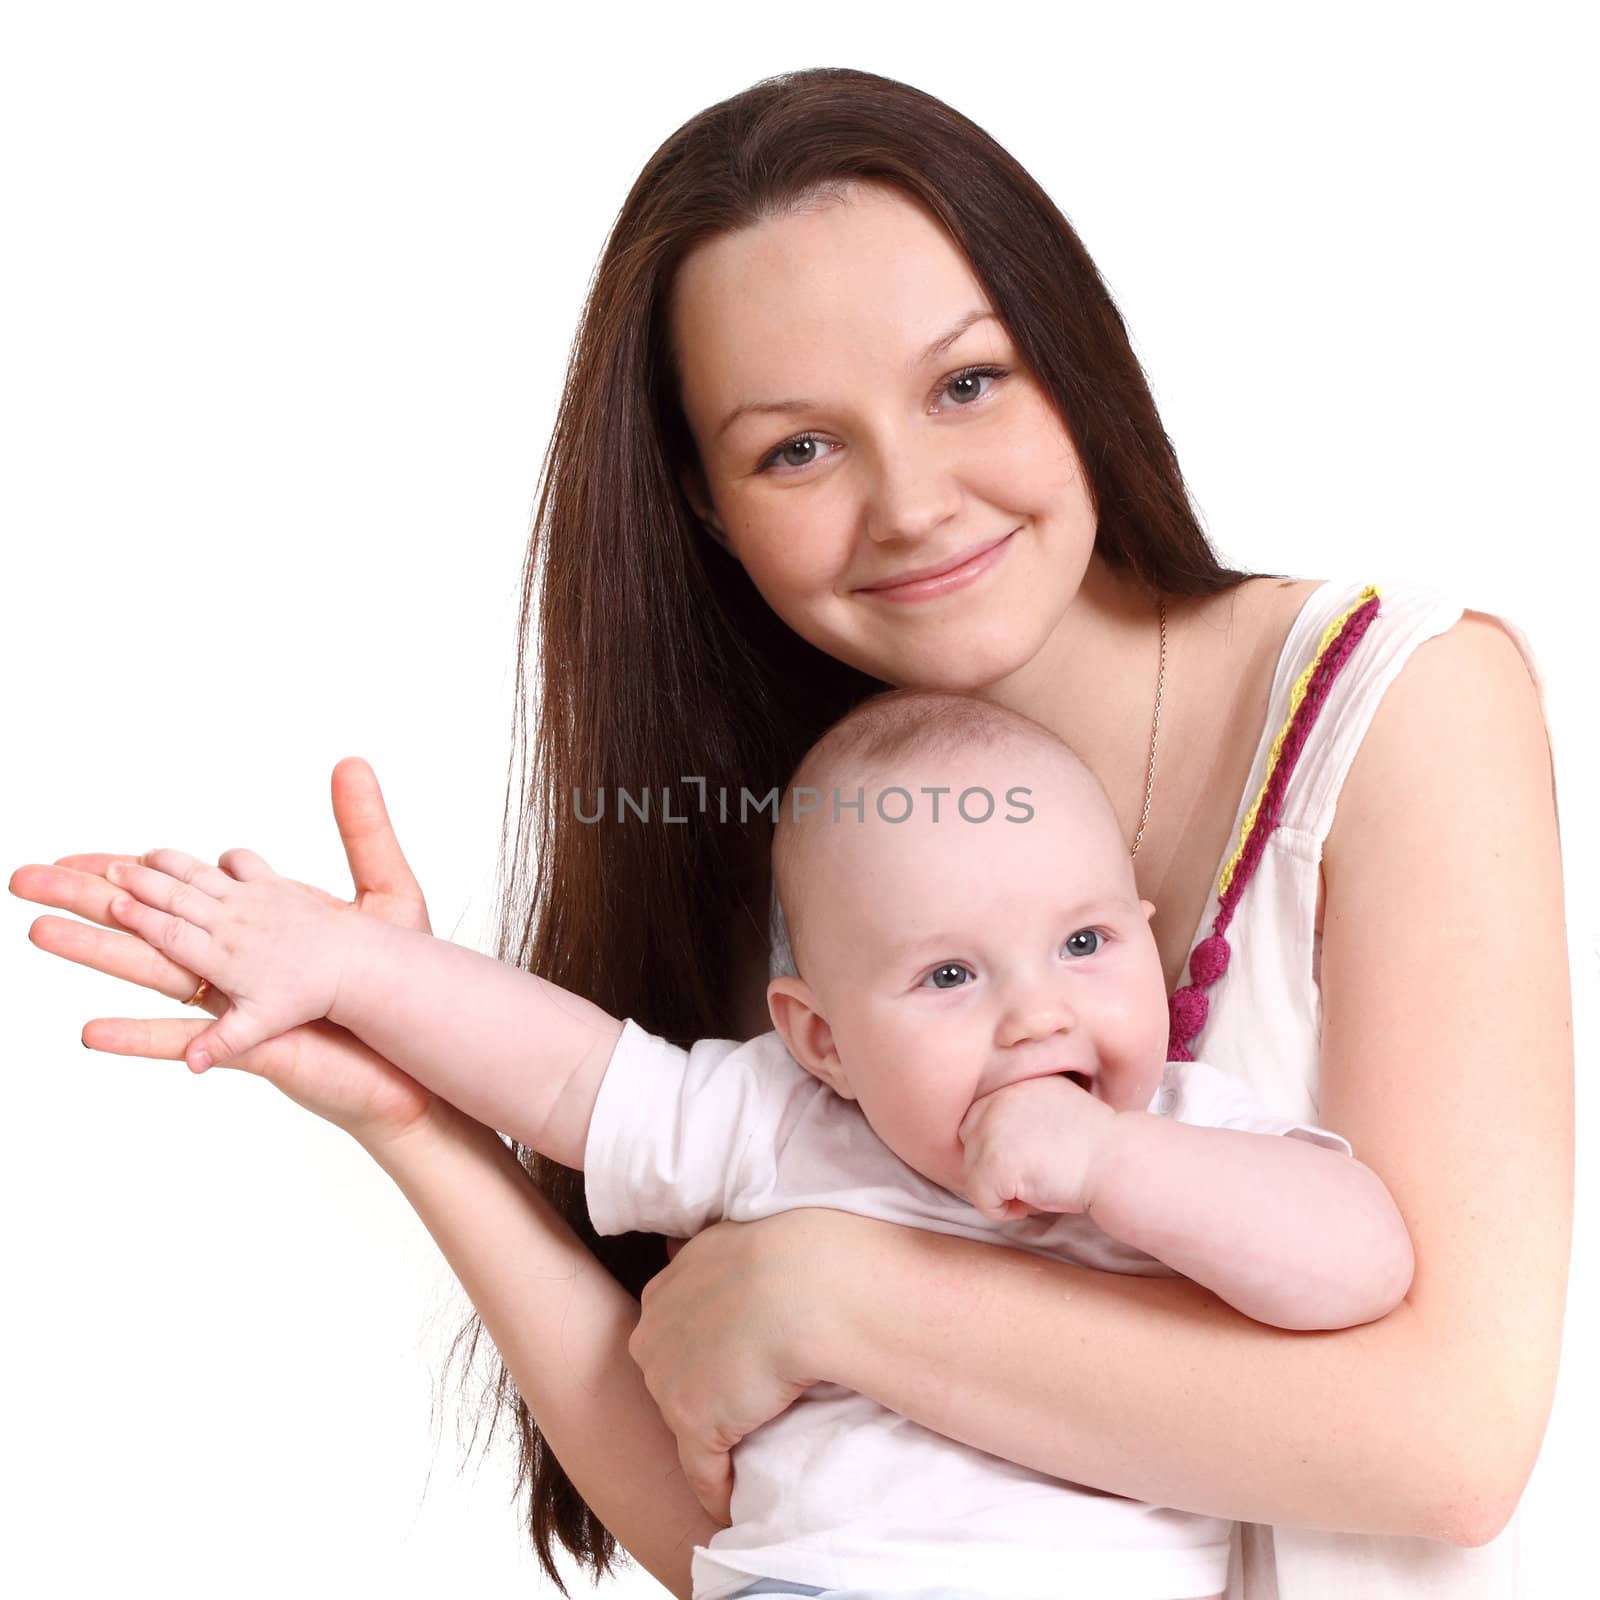 Young mum and the small son, portrait on a white background close up, the kid sits at mum in a lap, having put the hand on mum's, a format square